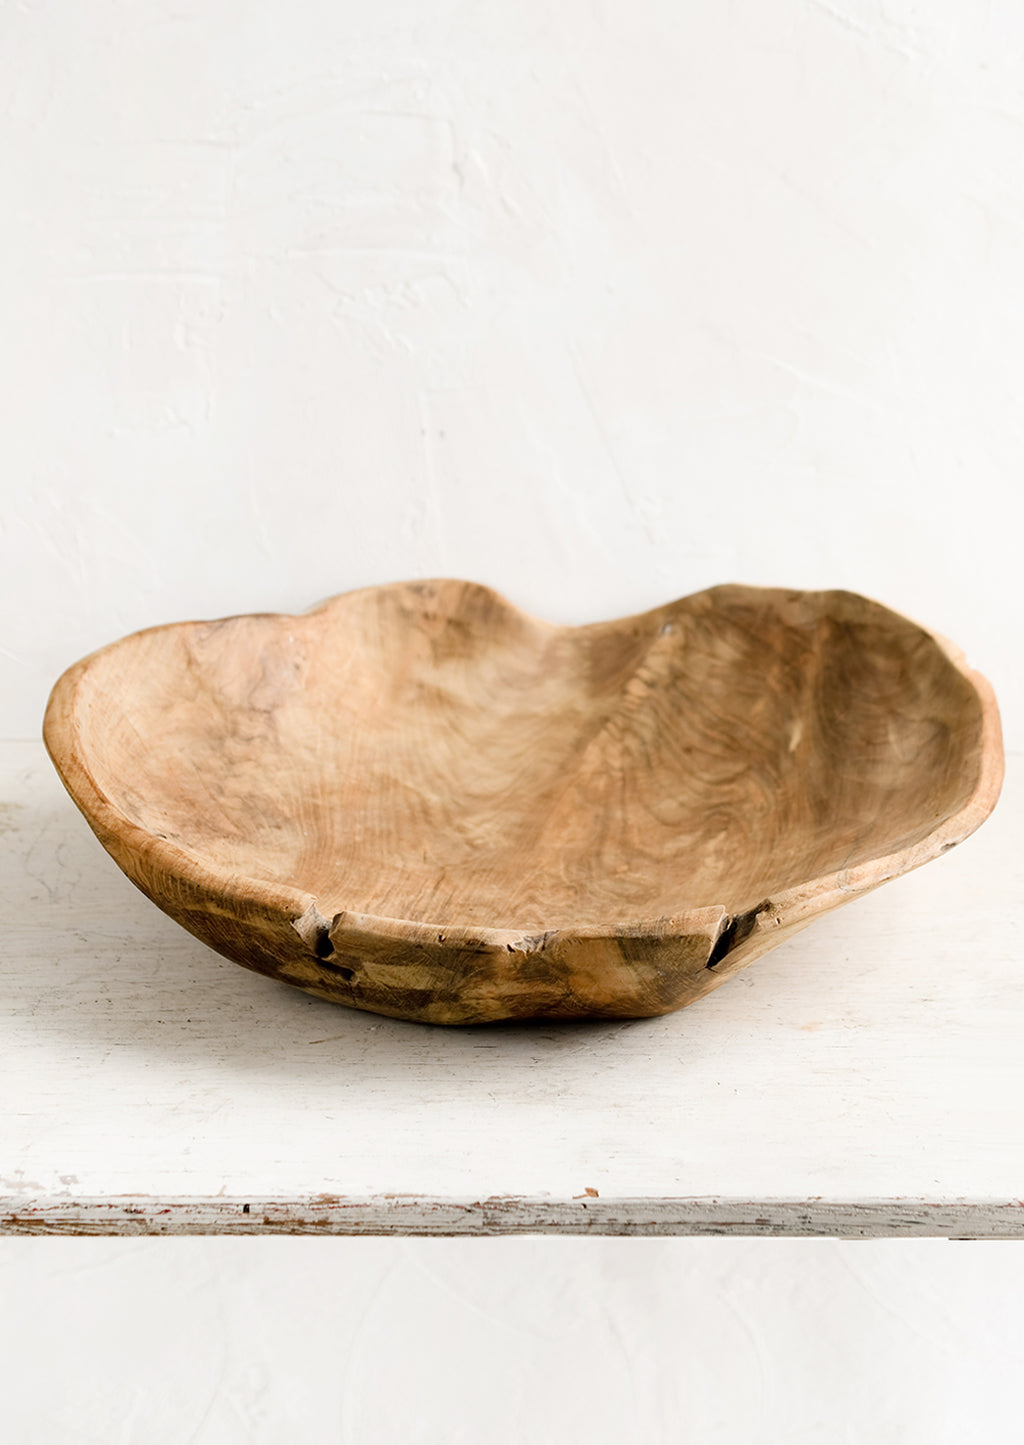 1: A large teak wood bowl with natural cracks and fissures.